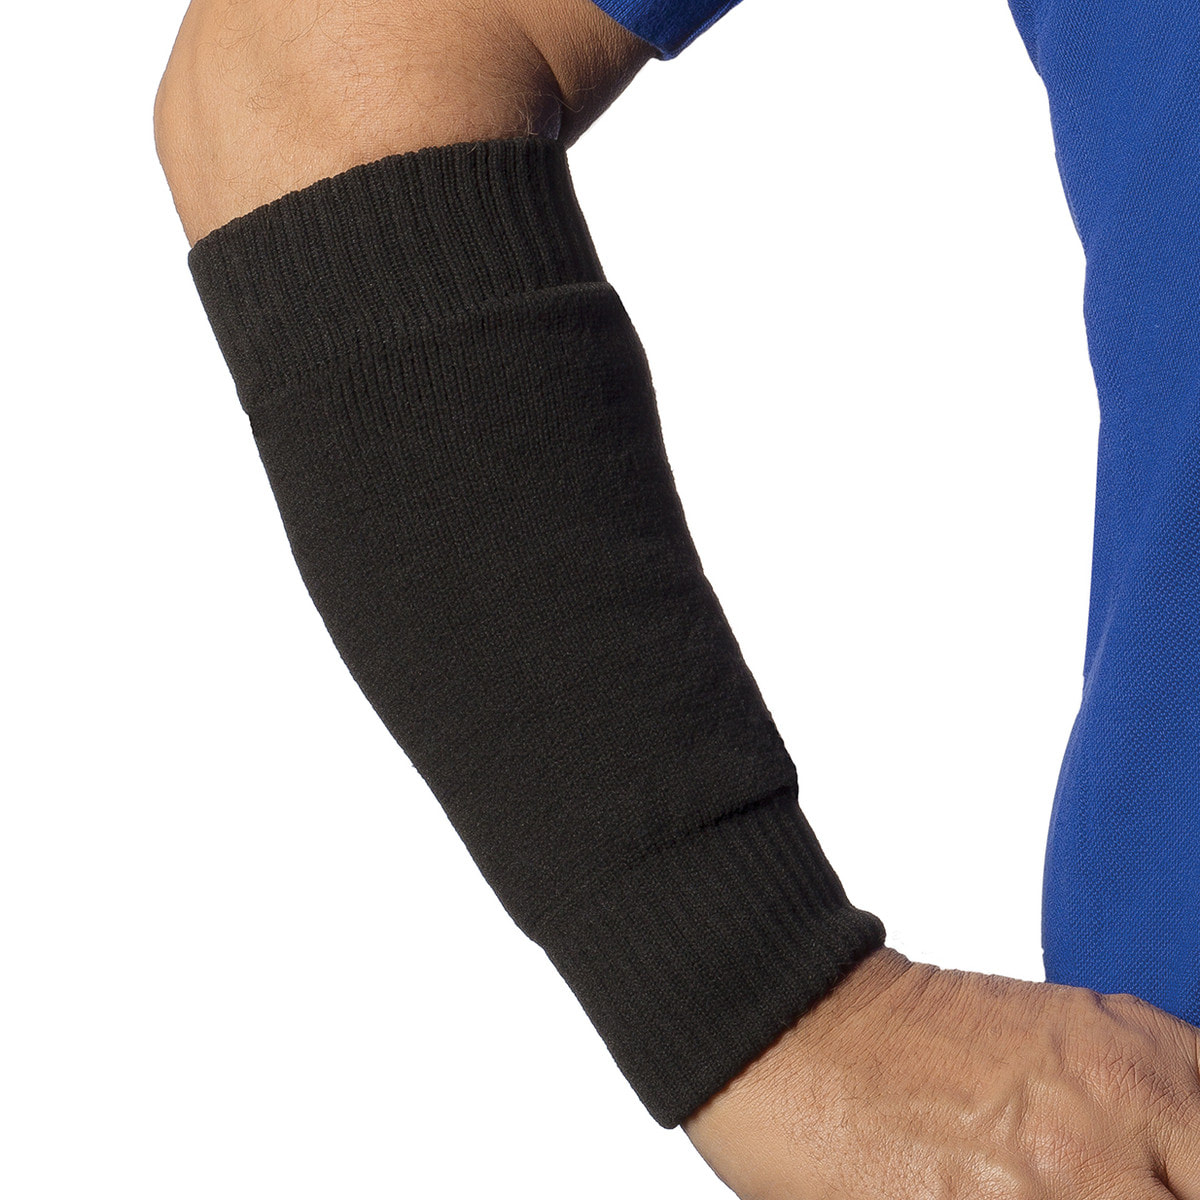 Forearm Sleeve Cover, Limbkeepers, Skin Protector